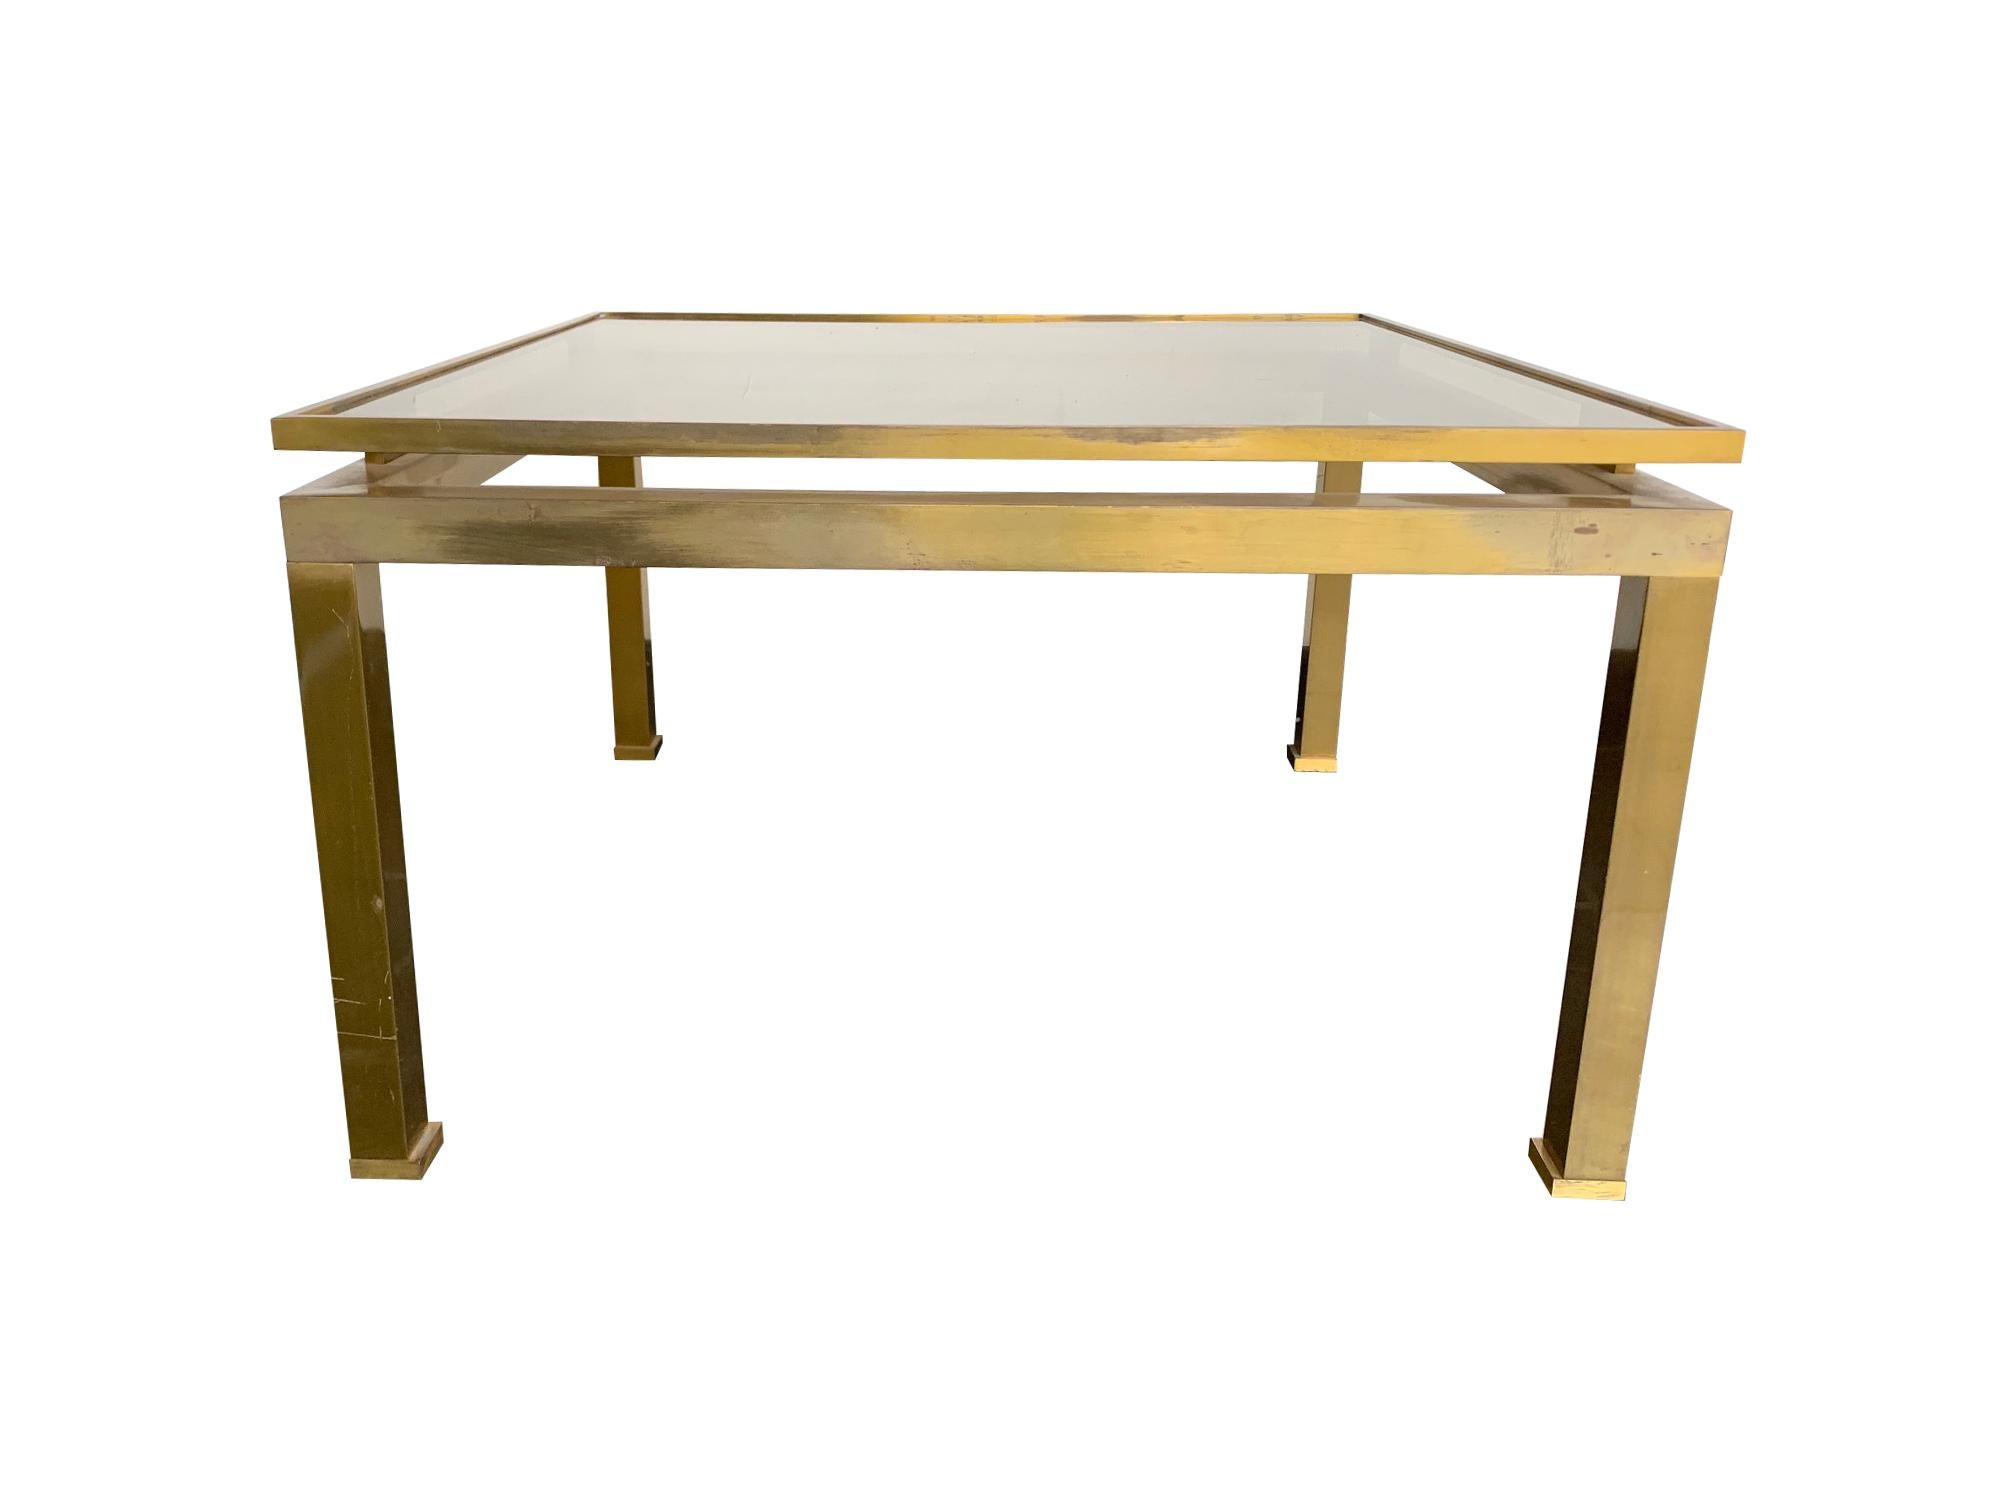 A 1970s original Guy Lefevre solid brass side table with characteristic floating top with smoked glass top and chinoiserie style foot detail. From the 